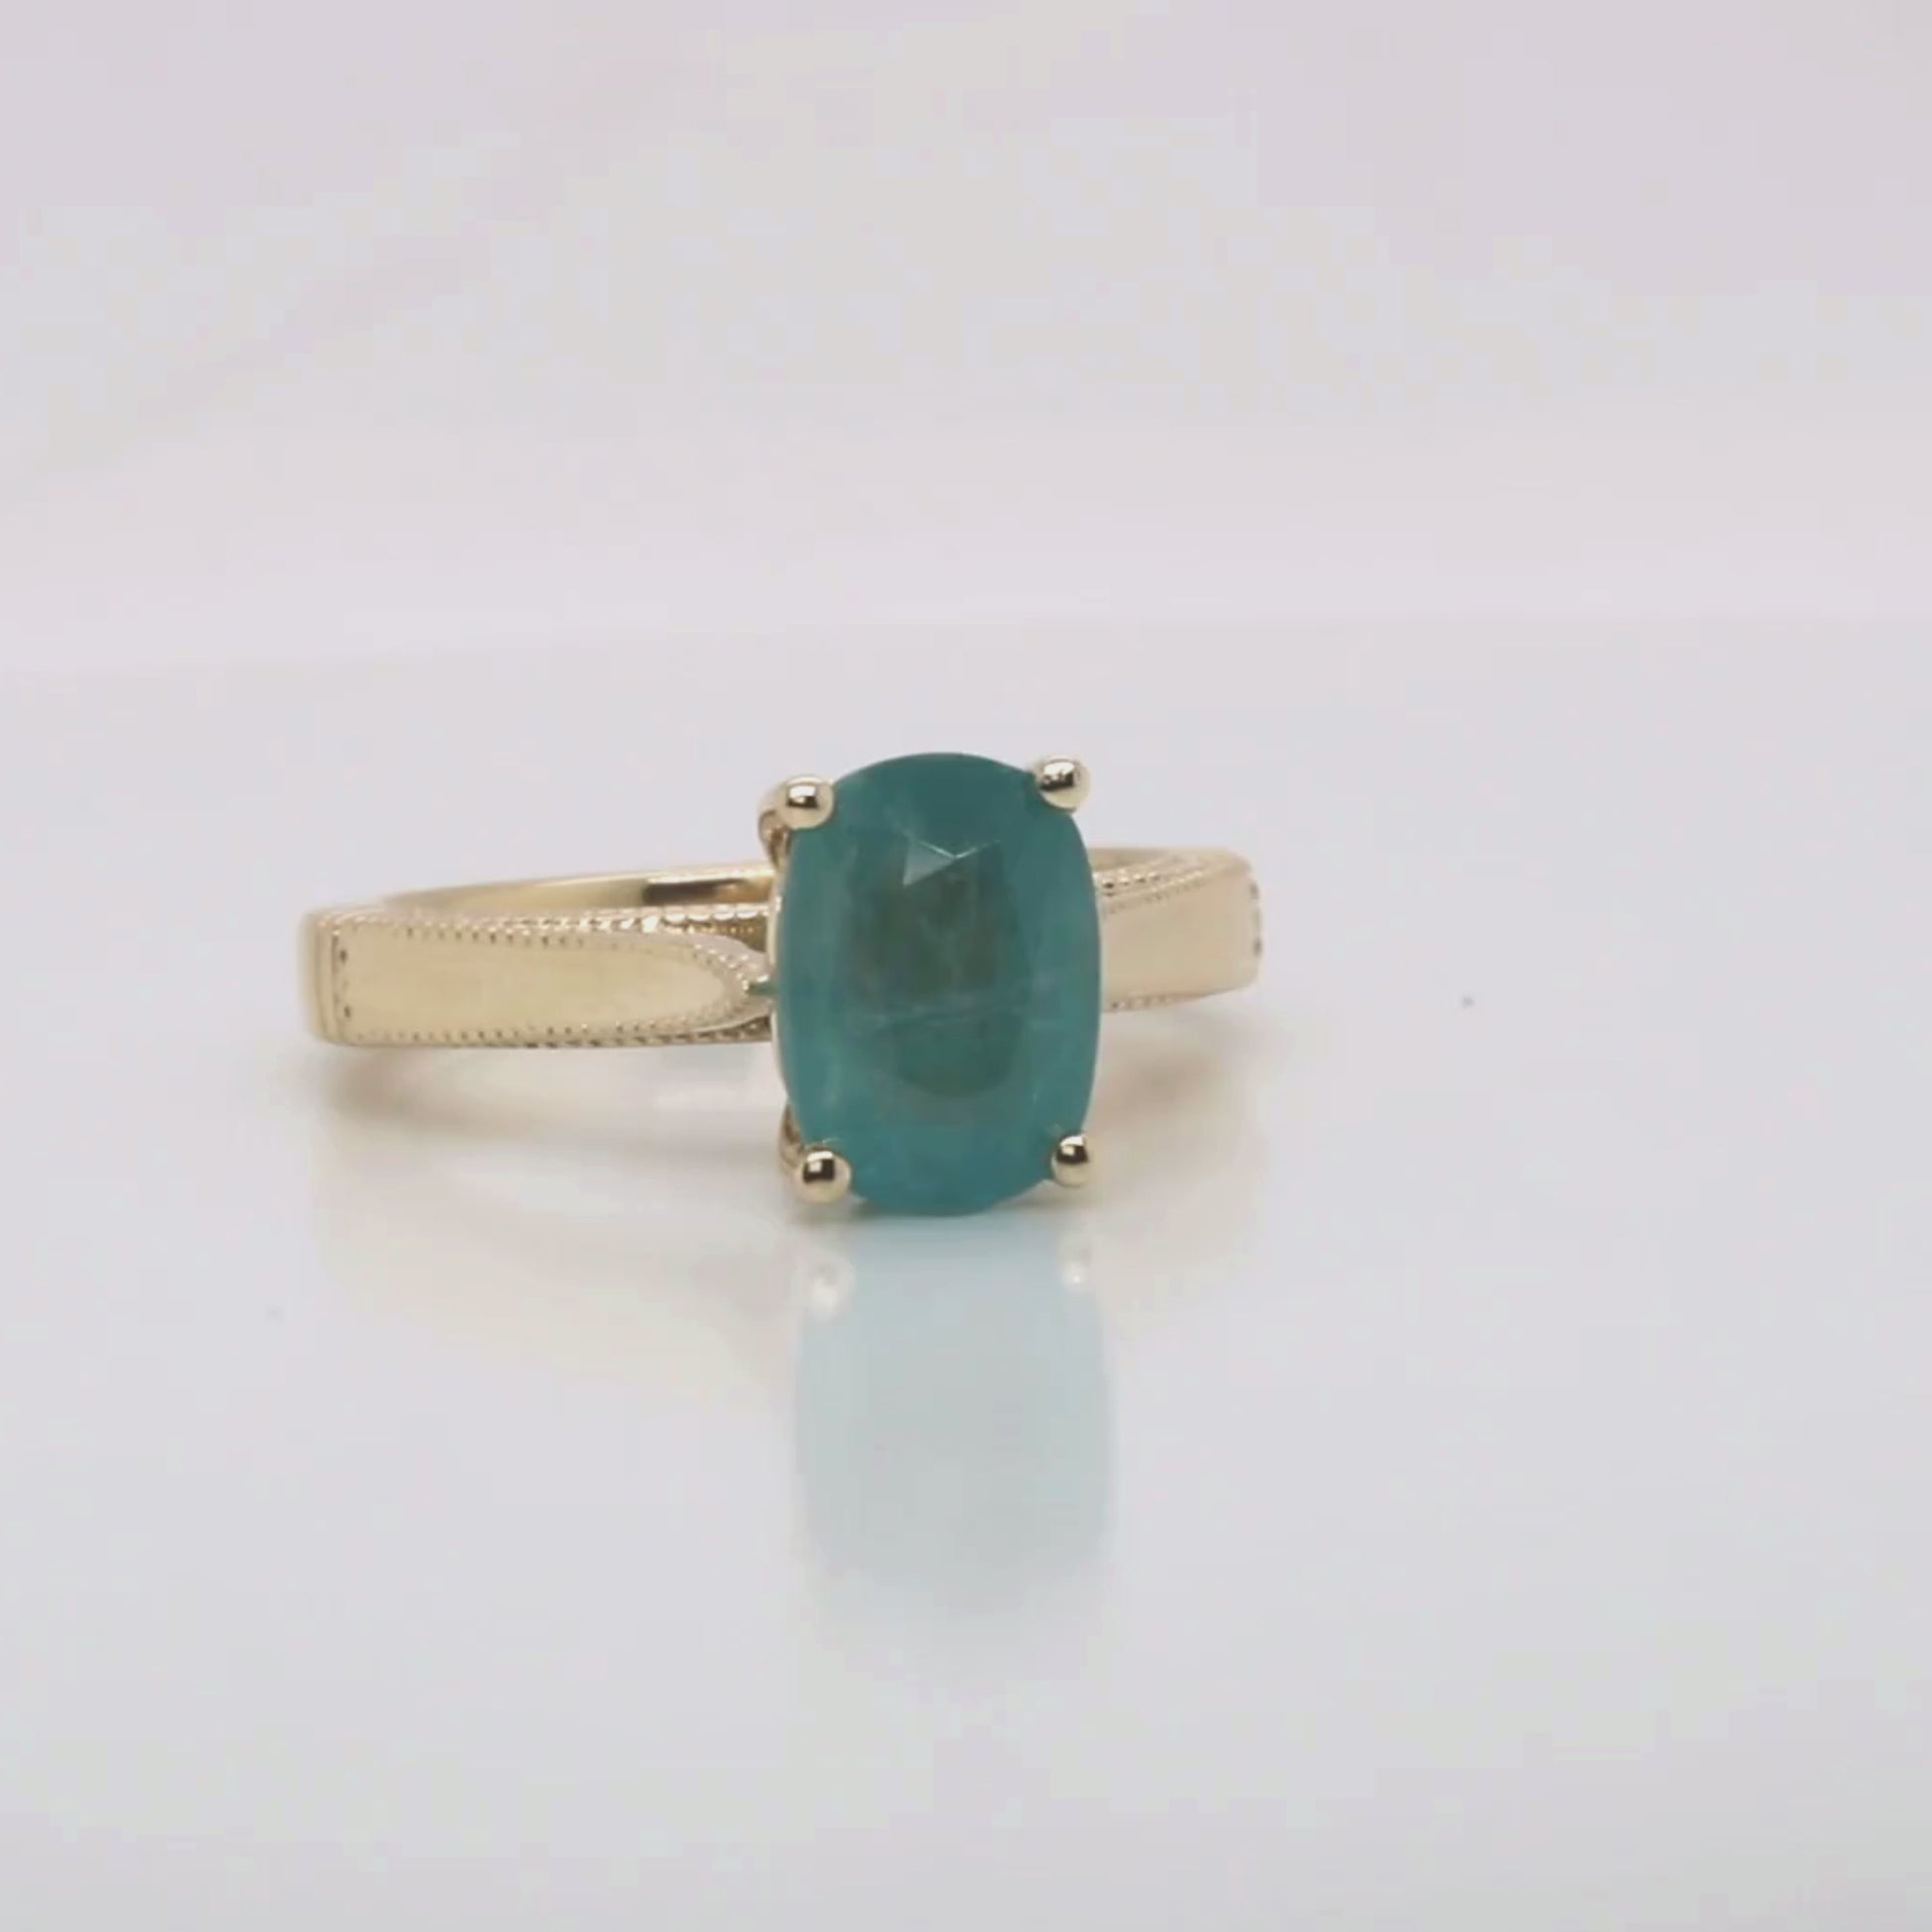 Jane Ring with a 3.22 Carat Teal Oval Grandidierite in 14k Yellow Gold - Ready to Size and Ship